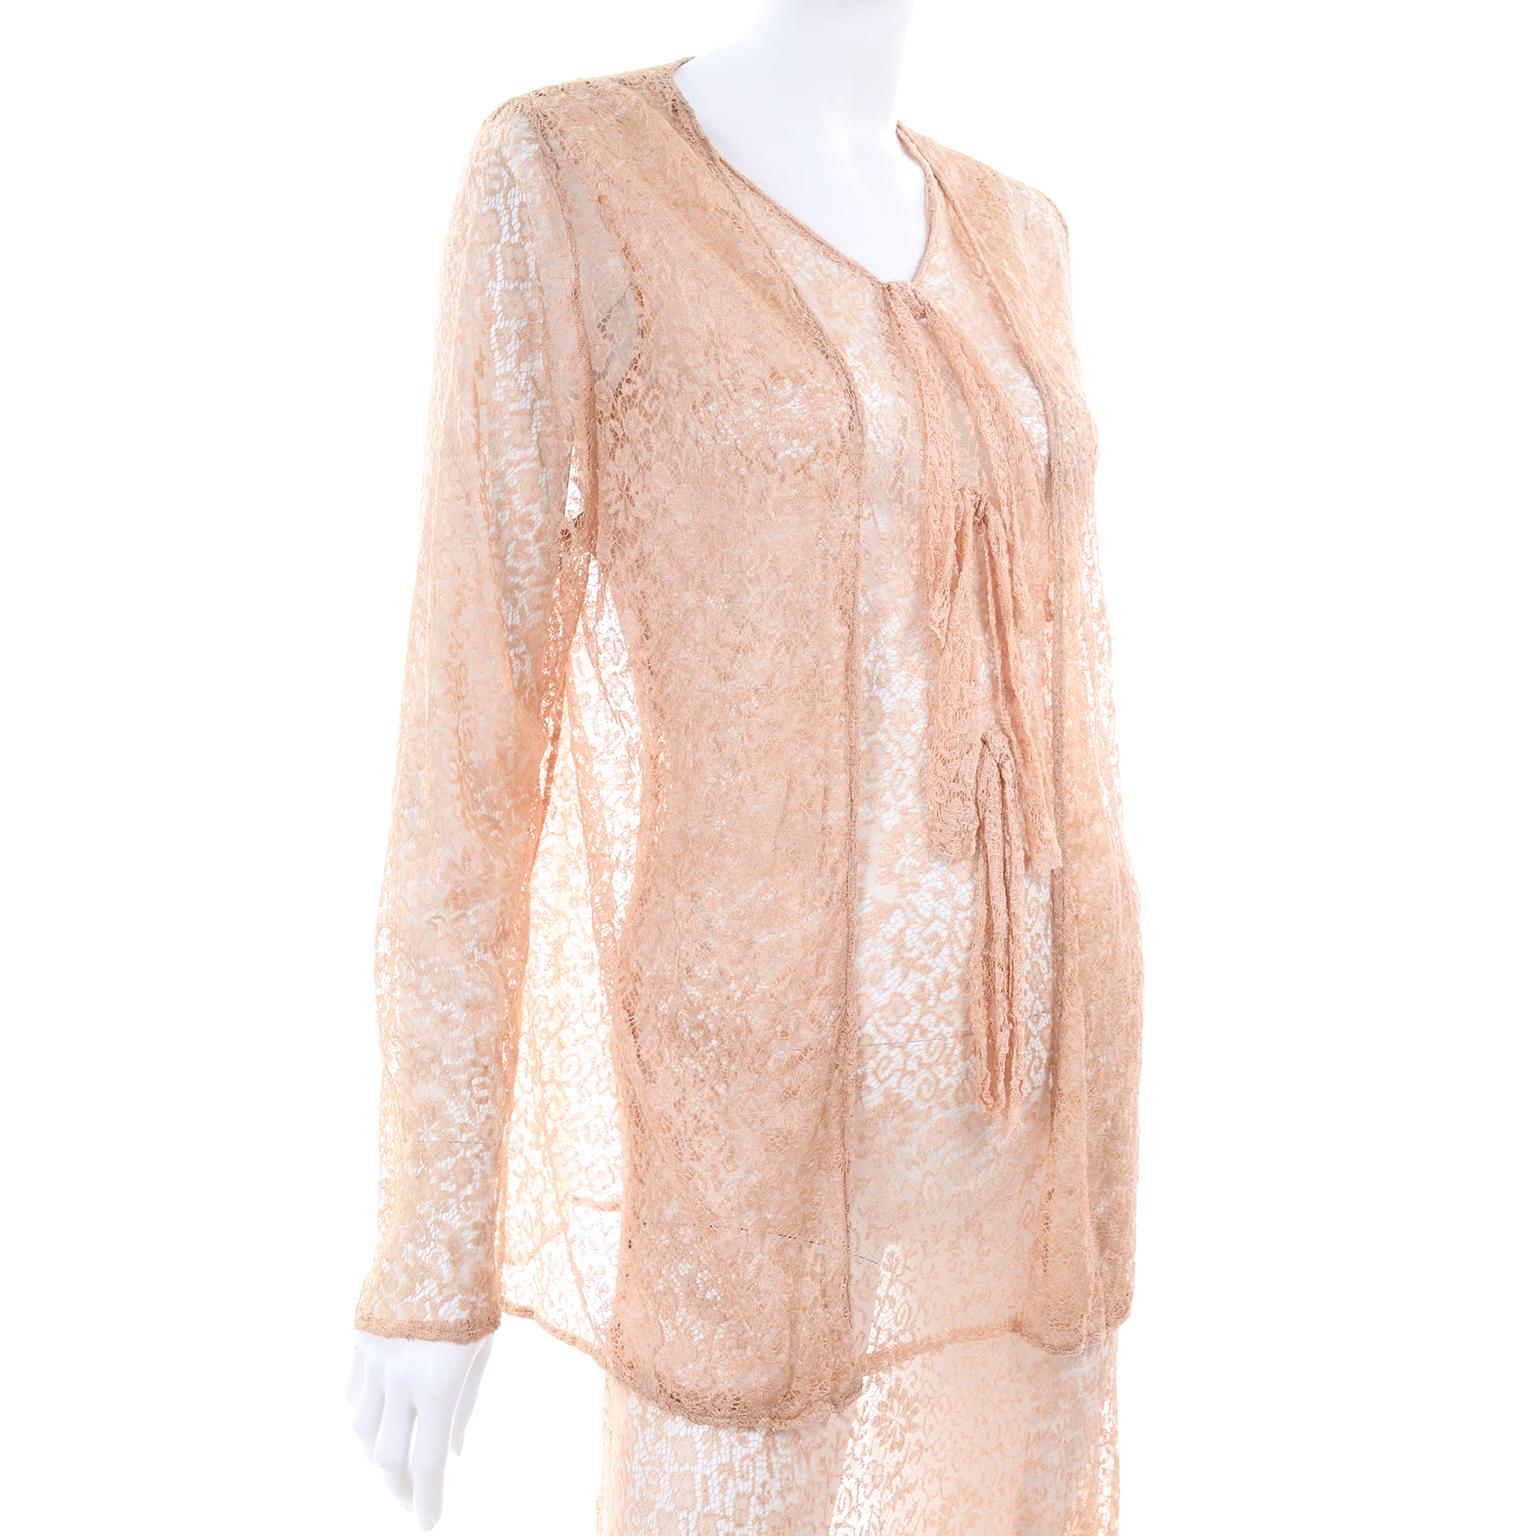 1930s Tan Peach Stretch Lace Dress With Bows and Matching Jacket 3